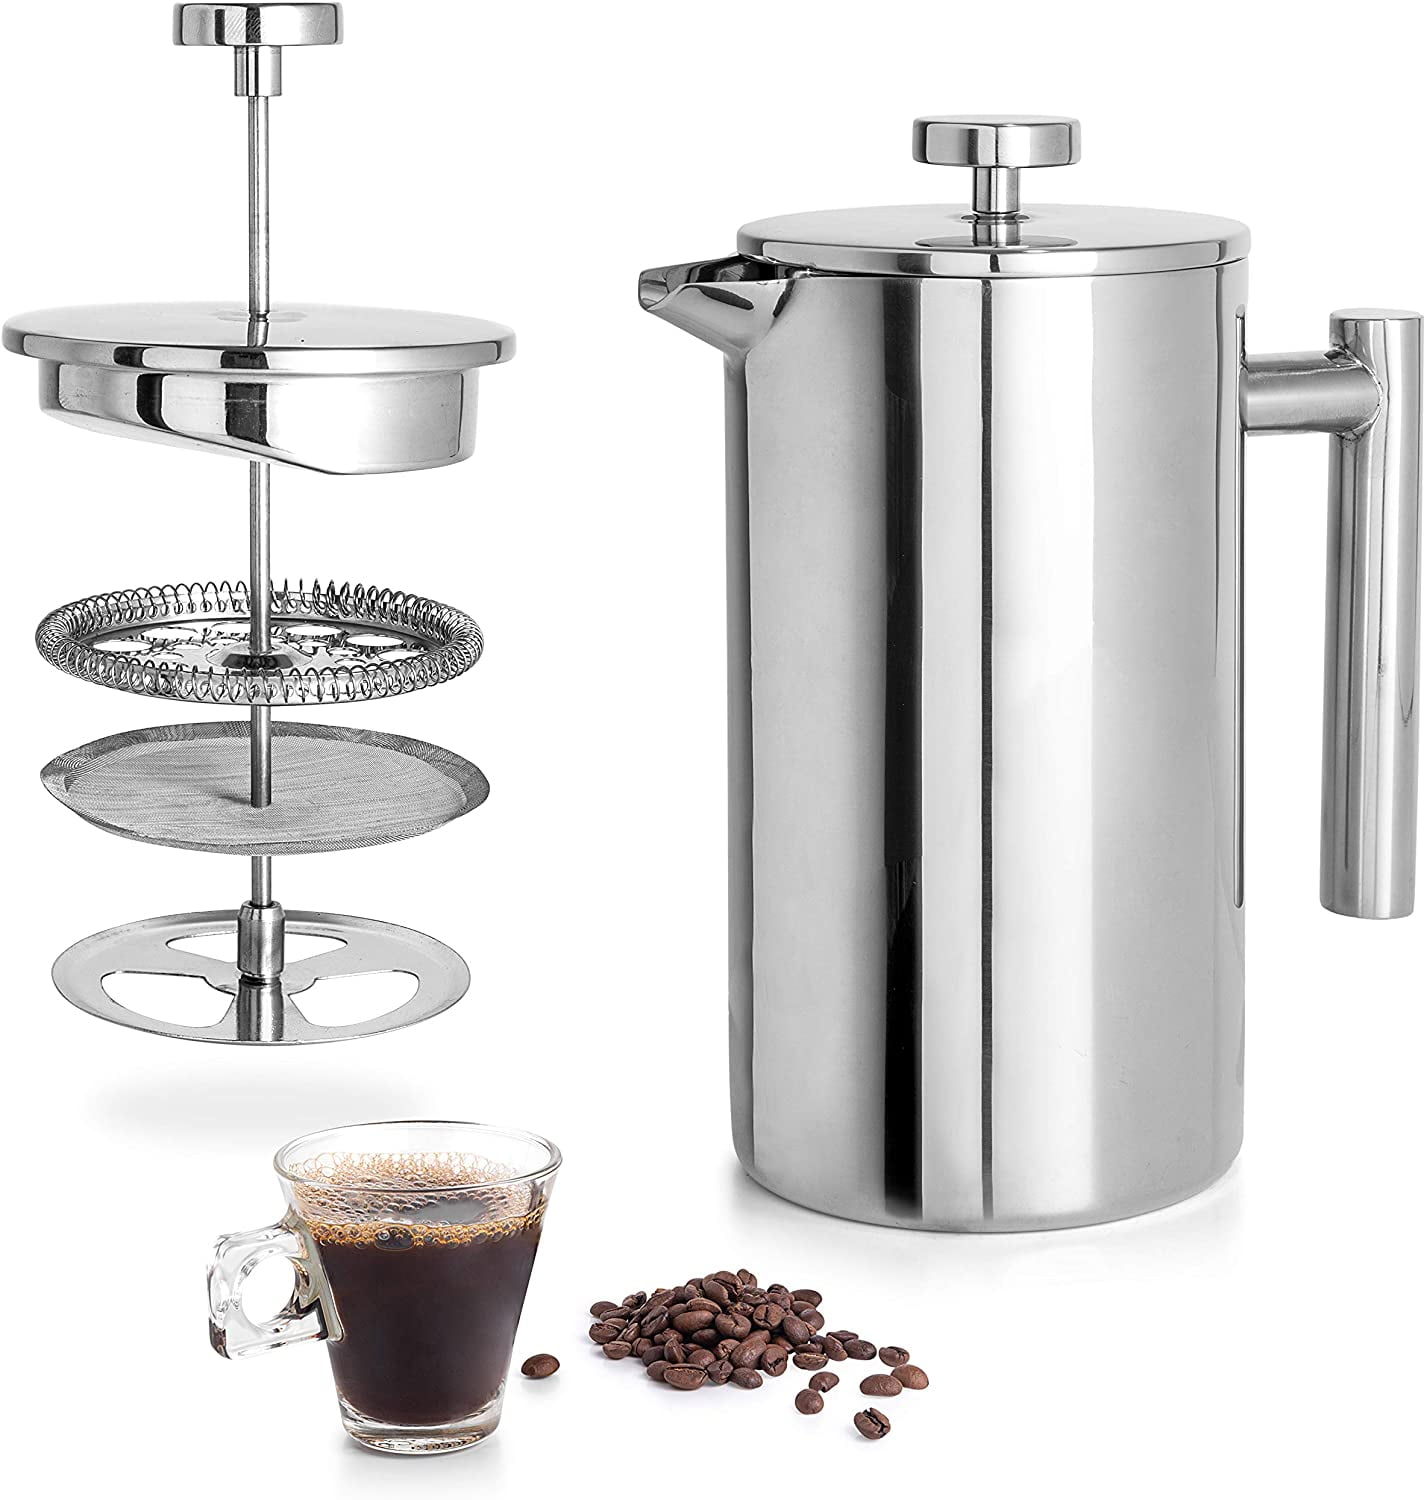 Brick Press, French Coffee Press, 0.6 Liter, Polished Stainless